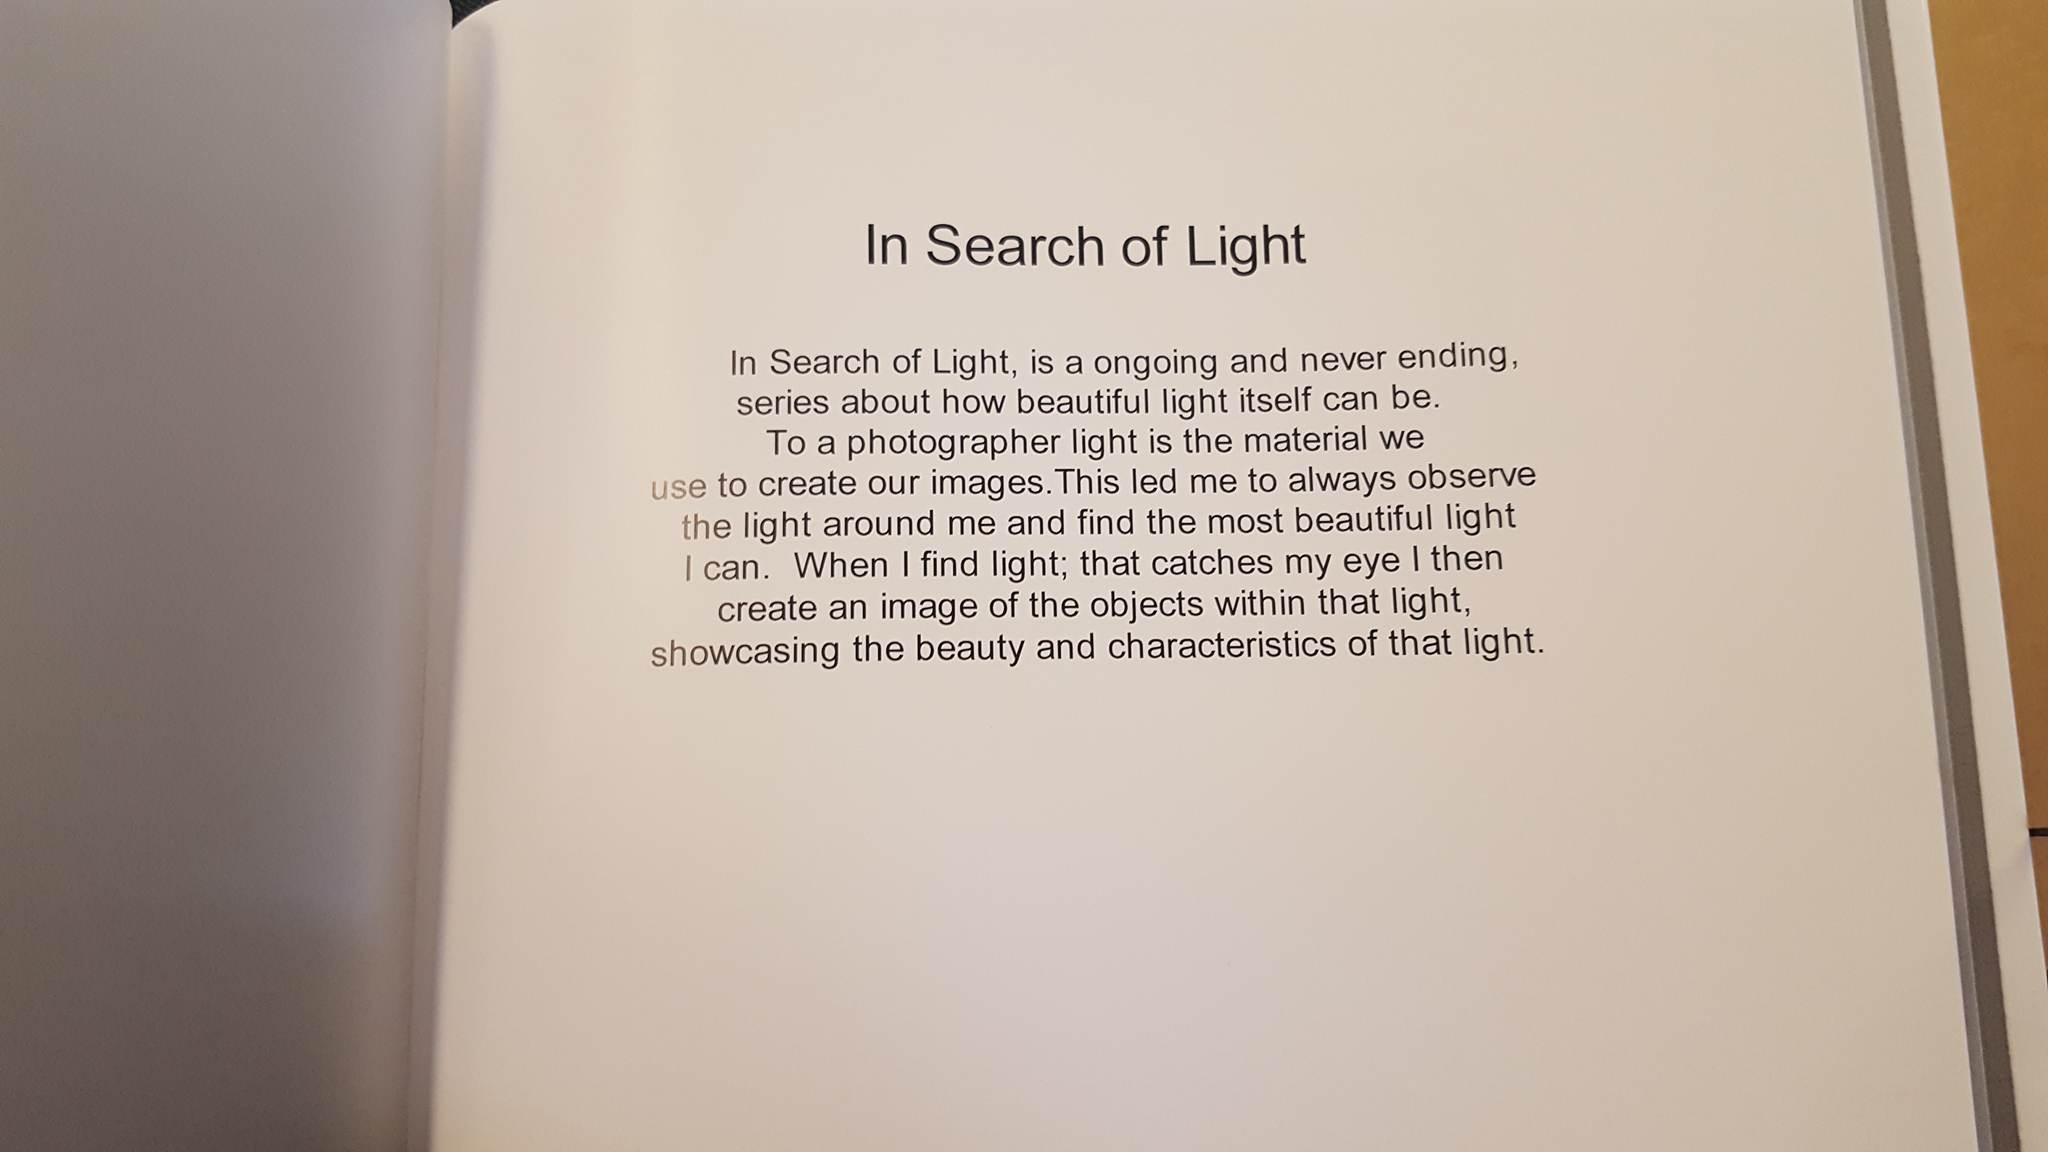 Short Description about the In Search of Light Personal Project